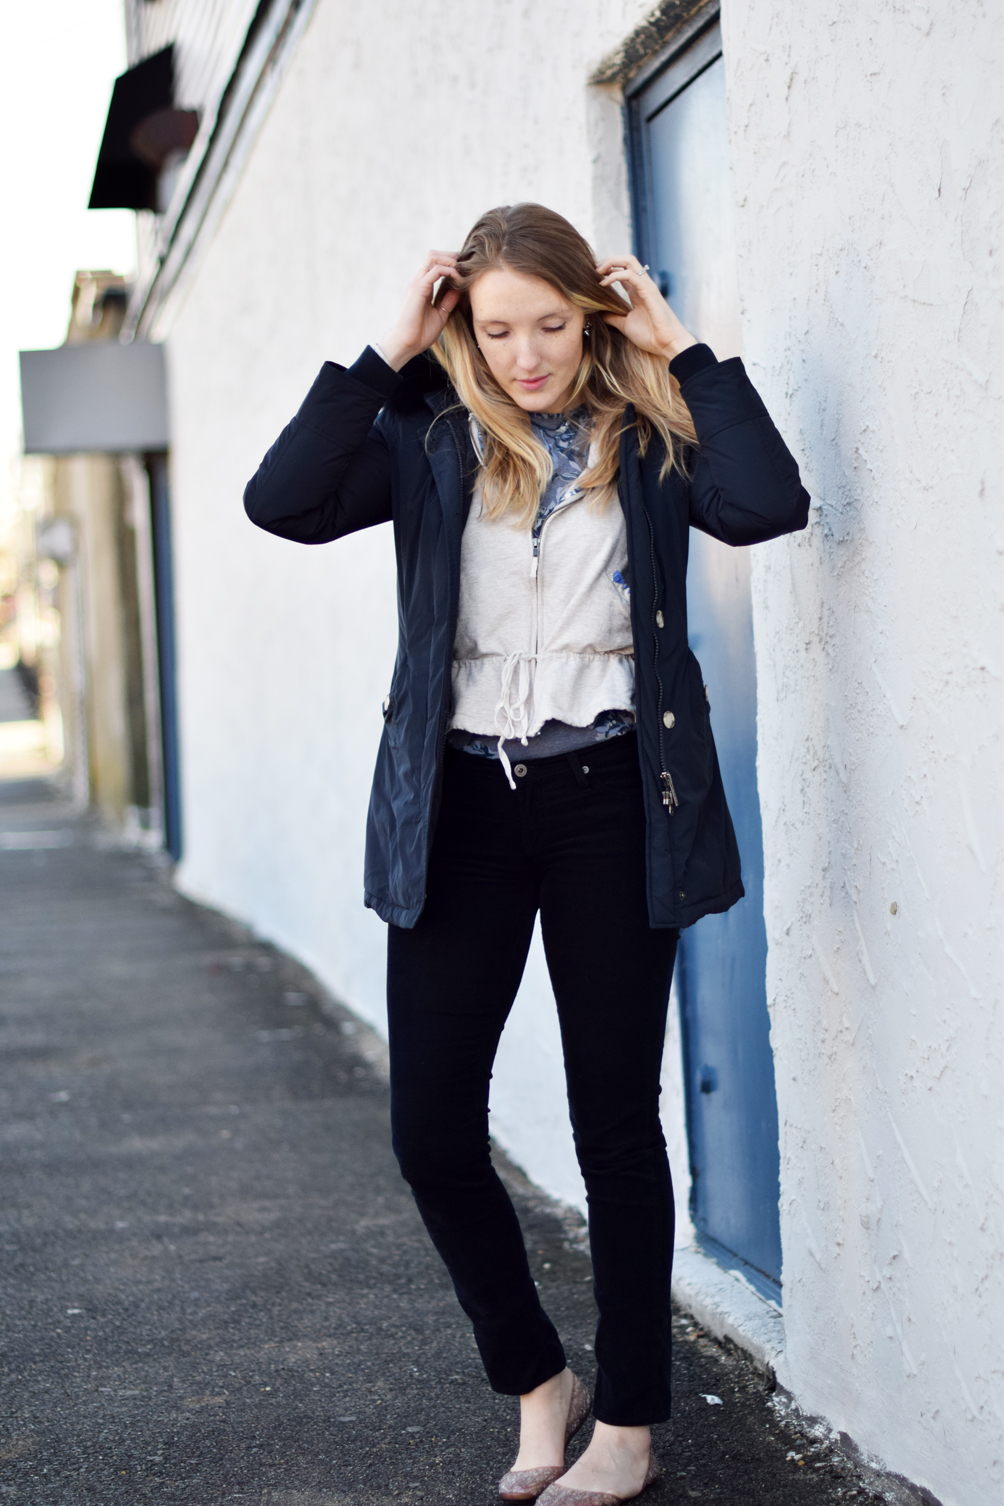 layered winter style in navy and black - one brass fox